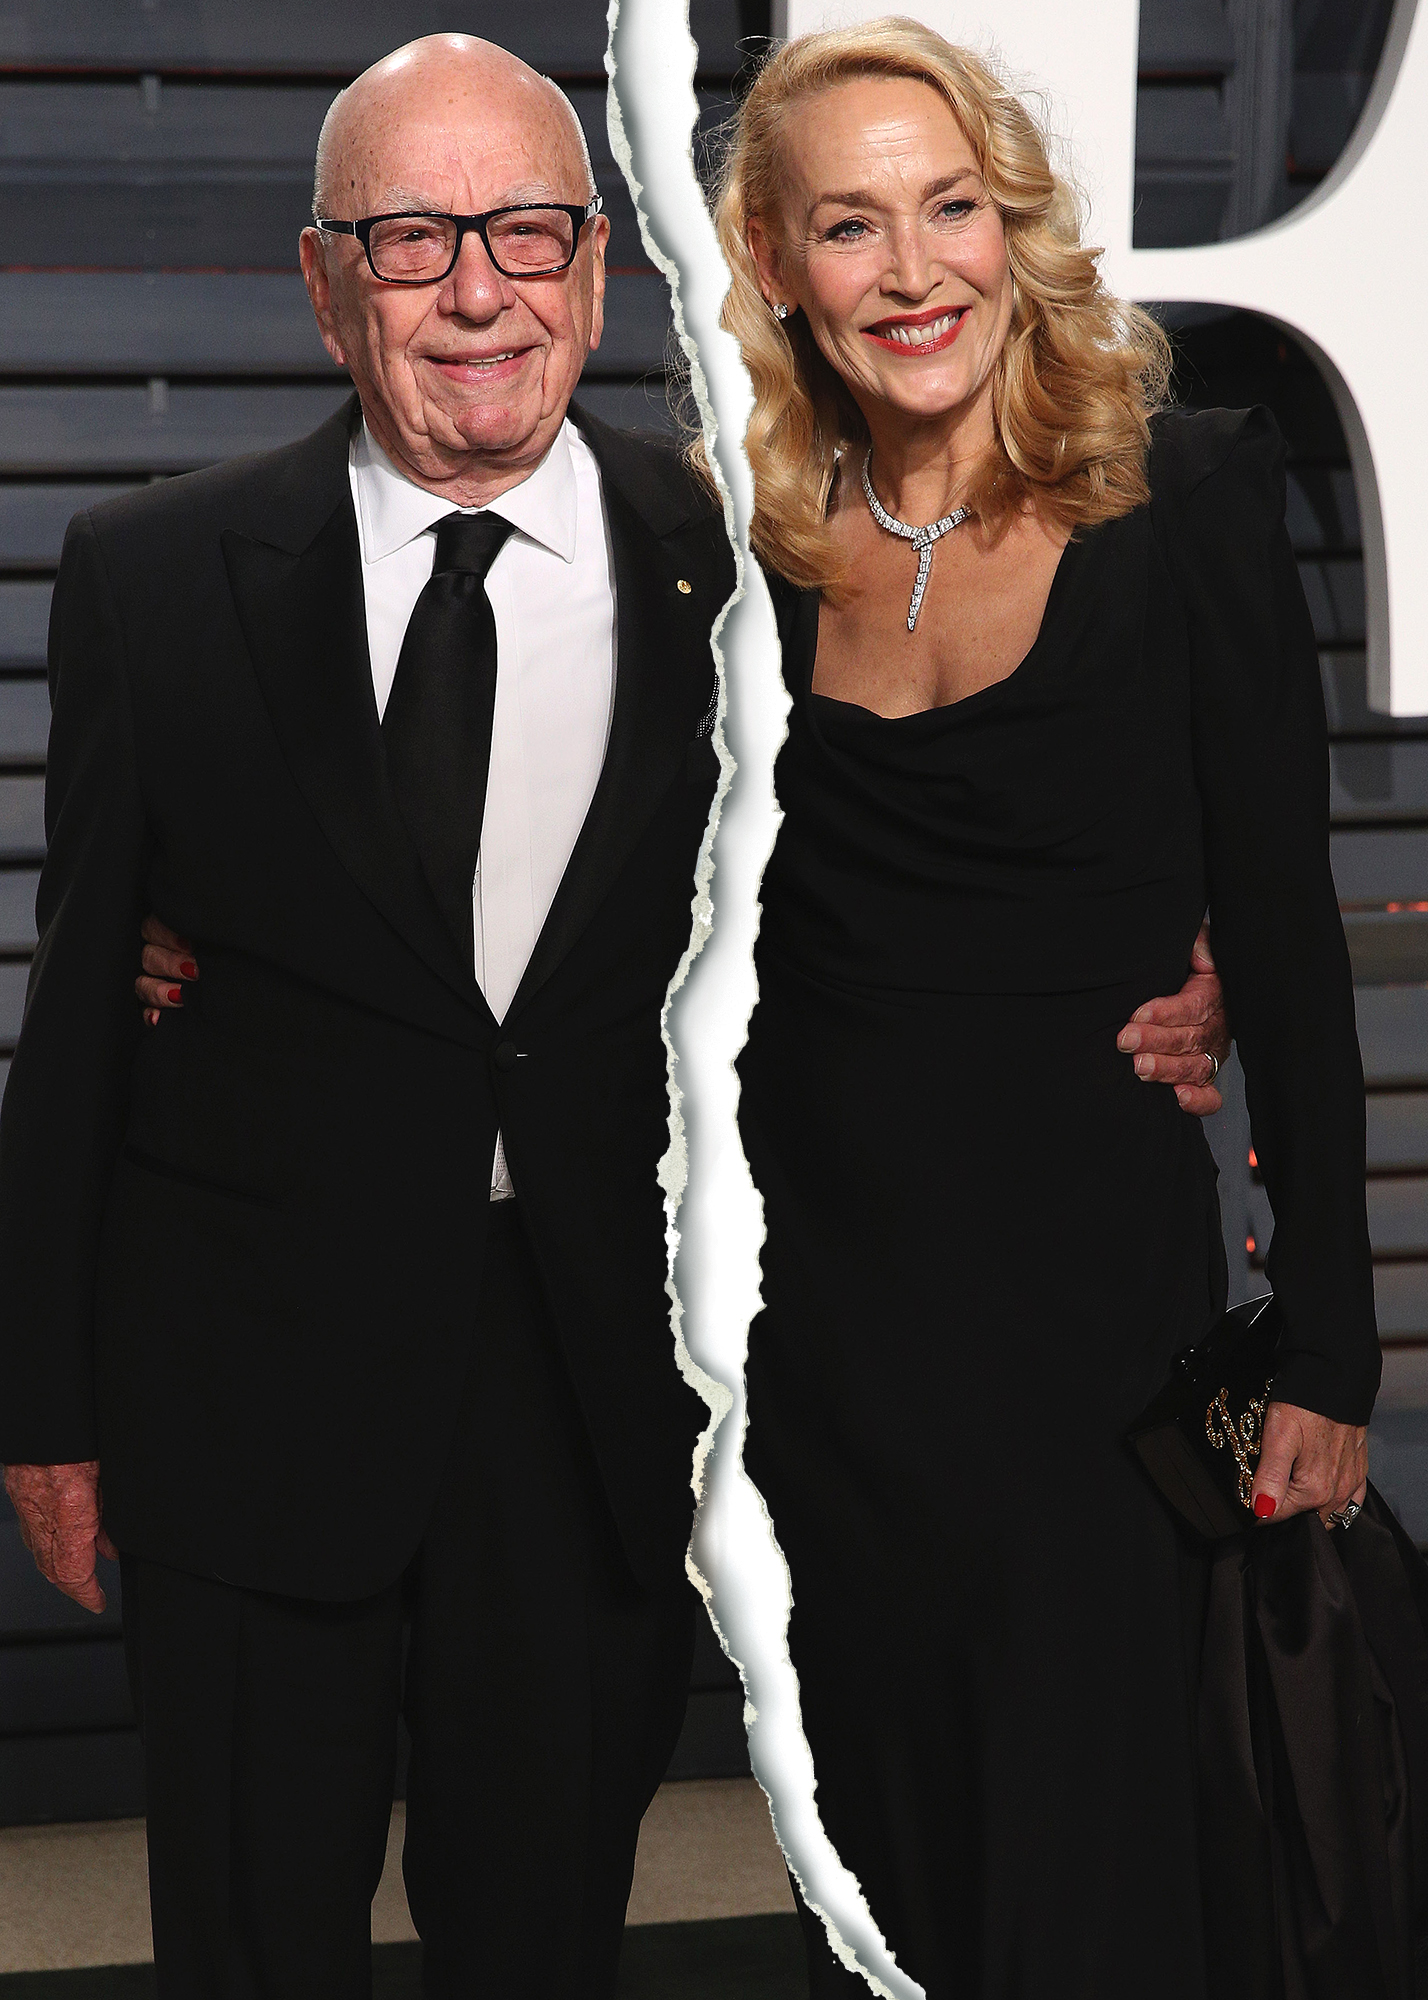 Jerry Hall Files for Divorce From Media Mogul Rupert Murdoch After 6 Years of Marriage